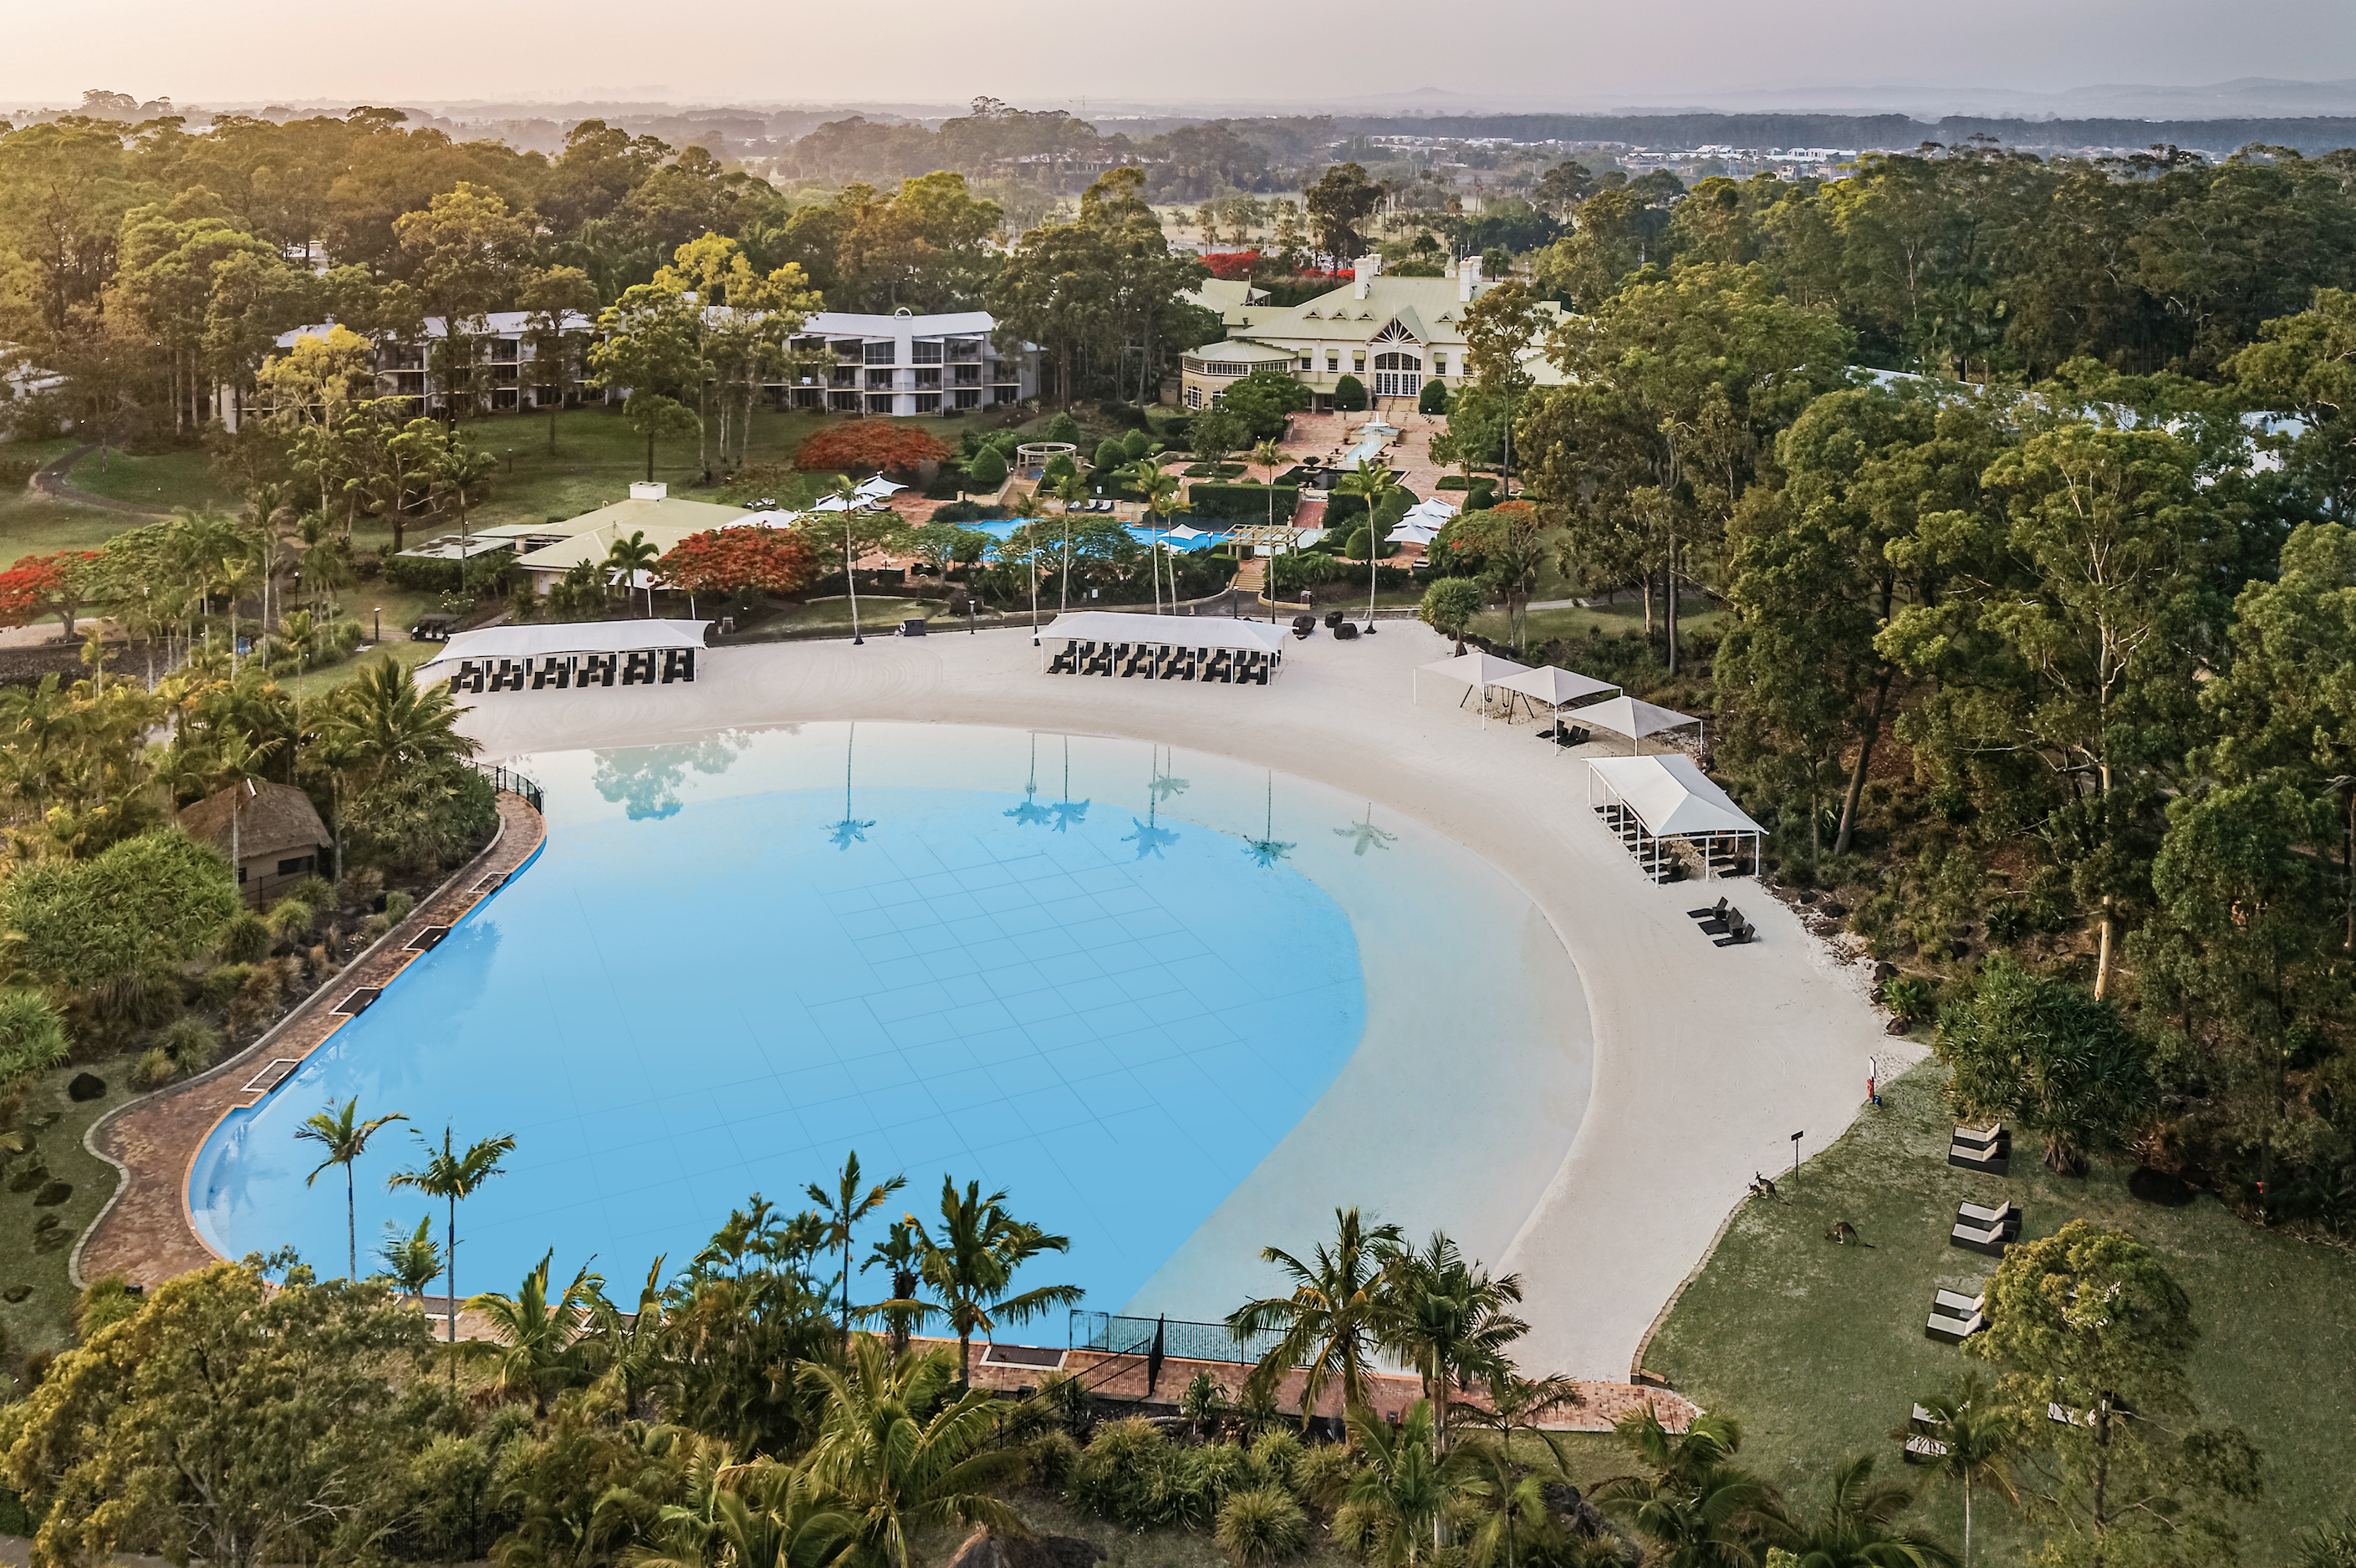 Visiting crews enjoy VIP access to the nearby InterContinental Sanctuary Cove Resort 5-star facilities (including spa, gymnasium, tennis courts, swimming pools and a championship golf course).